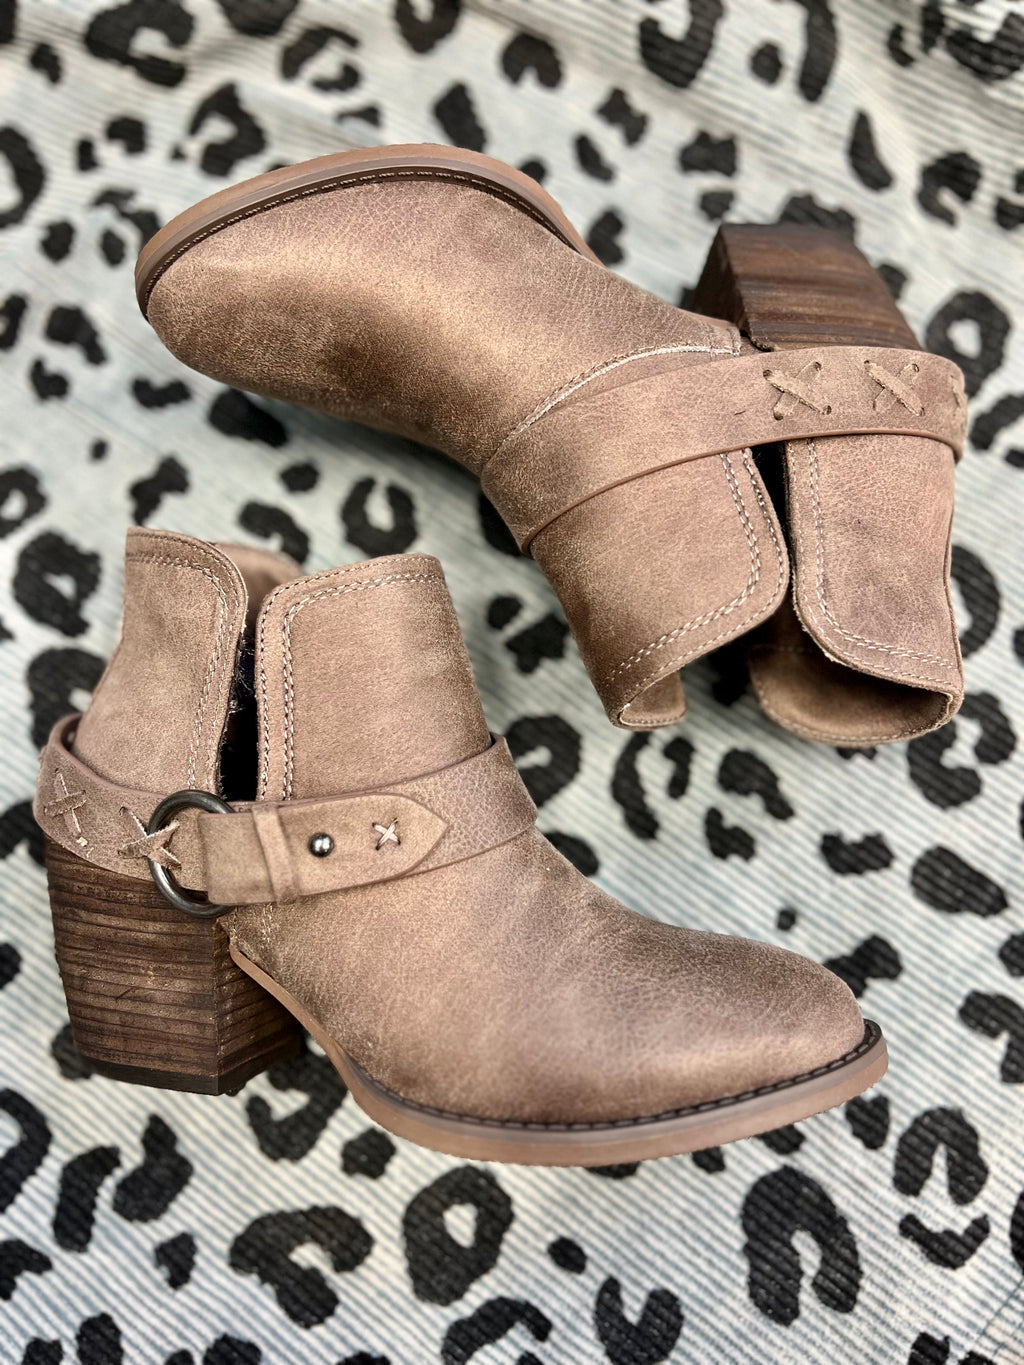 Step up your style game with The Barnyard Dance Booties ! Featuring a taupe color leather,  2 1/2" wood heel, 6" total height, plus inside and outside ankle slits and a  decorative wrap around ankle strap, these booties will take your look to the next level. Show ‘em you mean business!